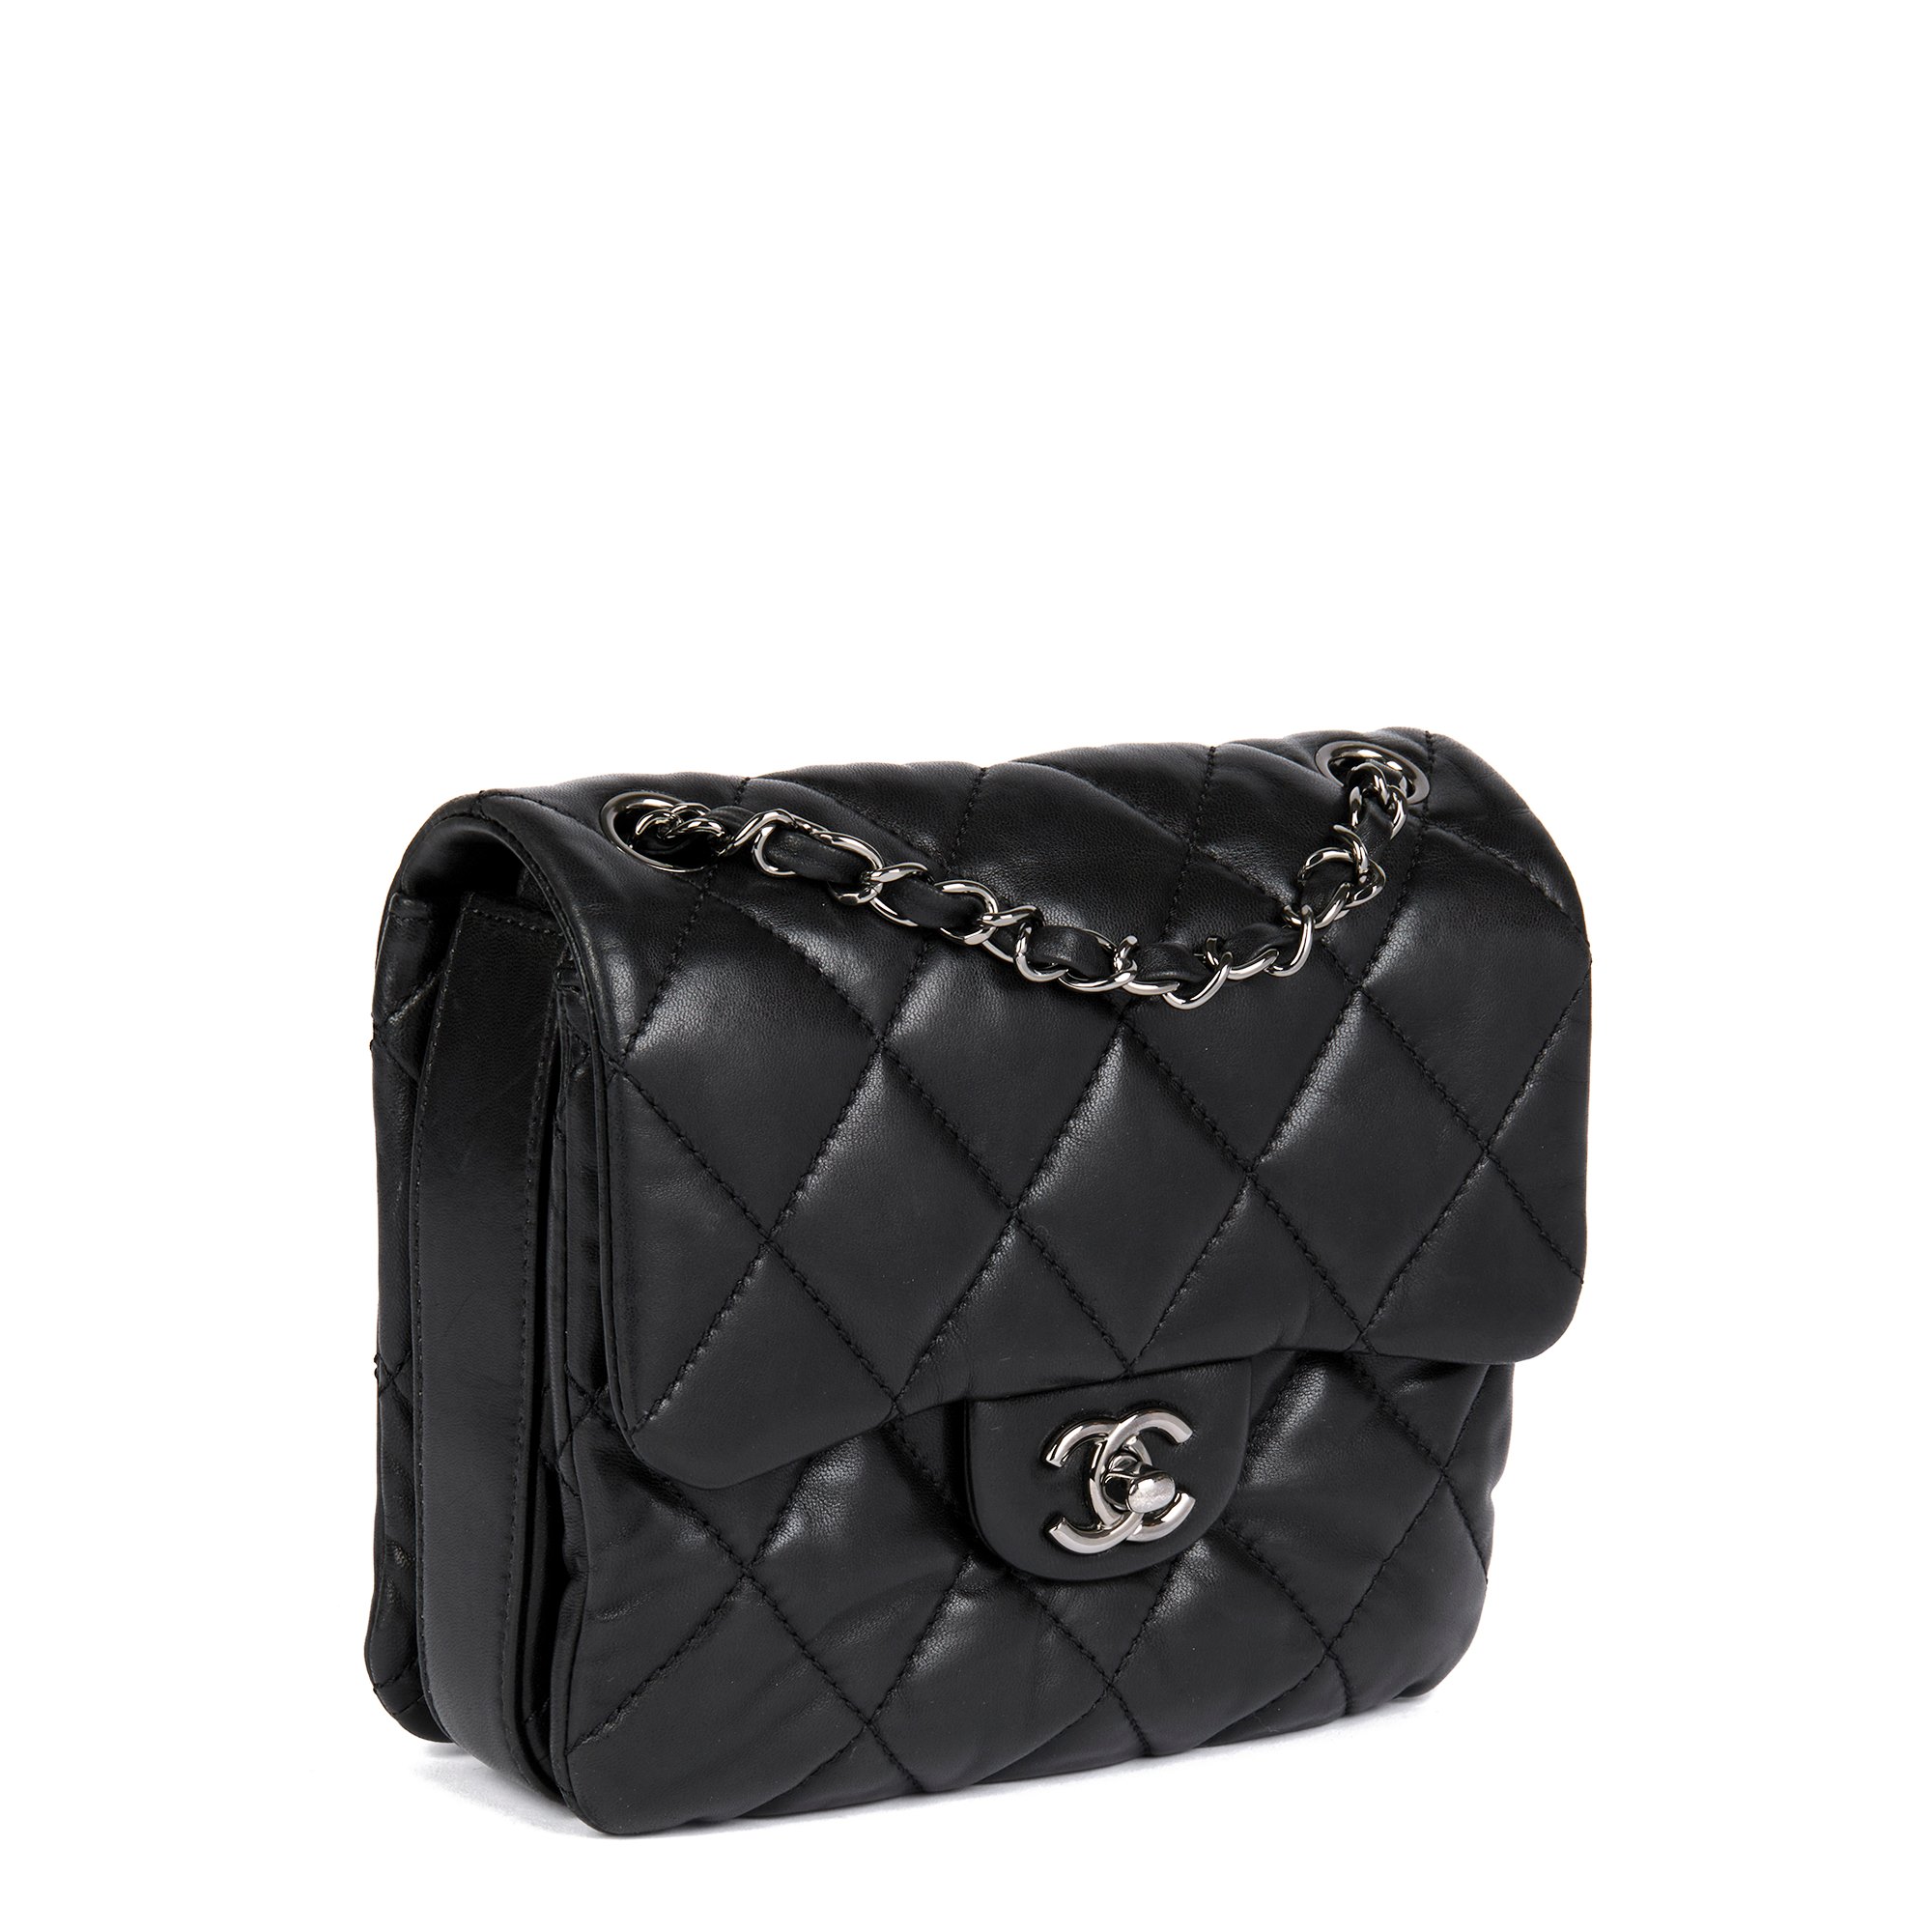 Chanel Black Quilted Lambskin Mini Triple Compartment Classic Single Flap Bag